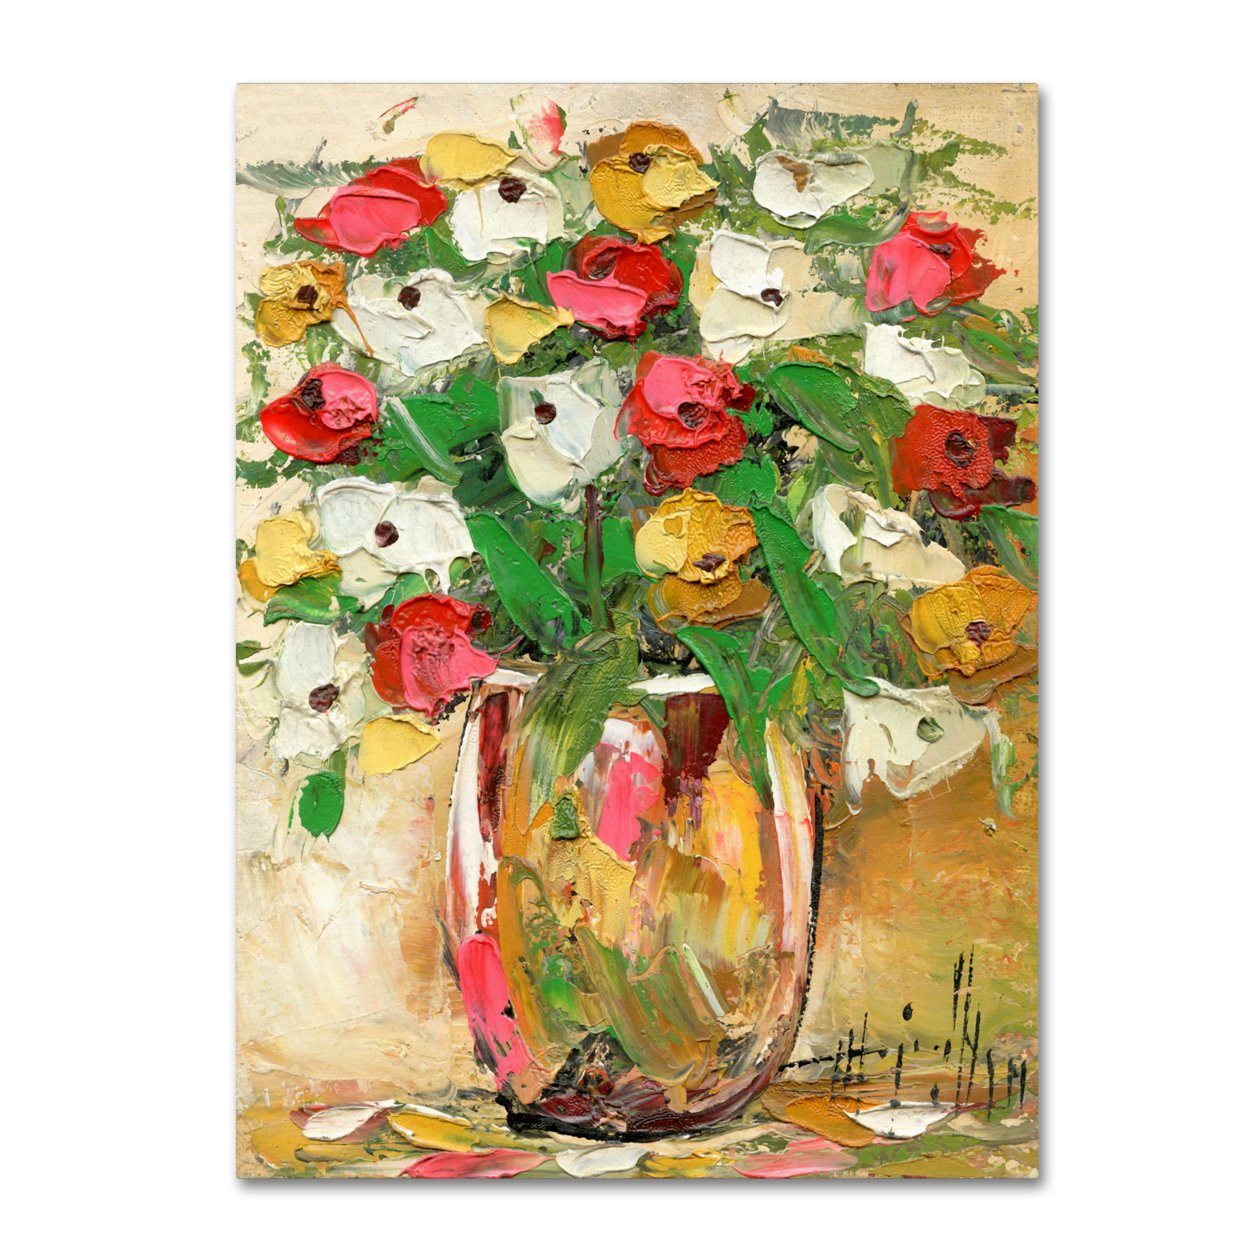 Hai Odelia 'Spring Flowers In A Vase 7' Canvas Wall Art 35 X 47 Inches